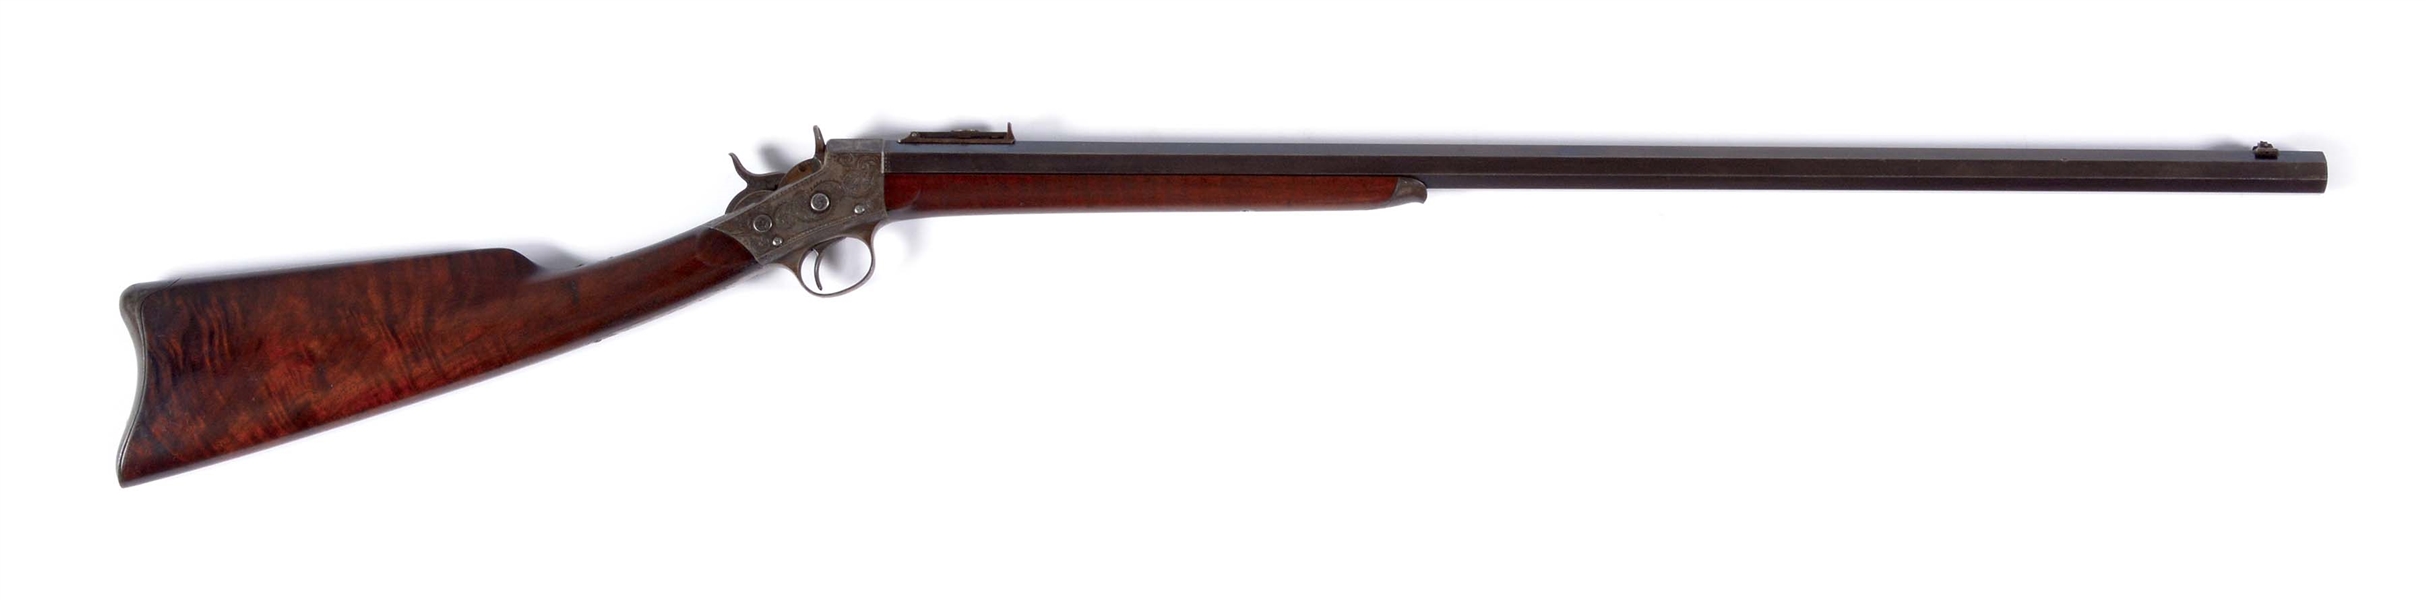 (A) FACTORY ENGRAVED REMINGTON NO. 2 RIFLE WITH HISTORY.